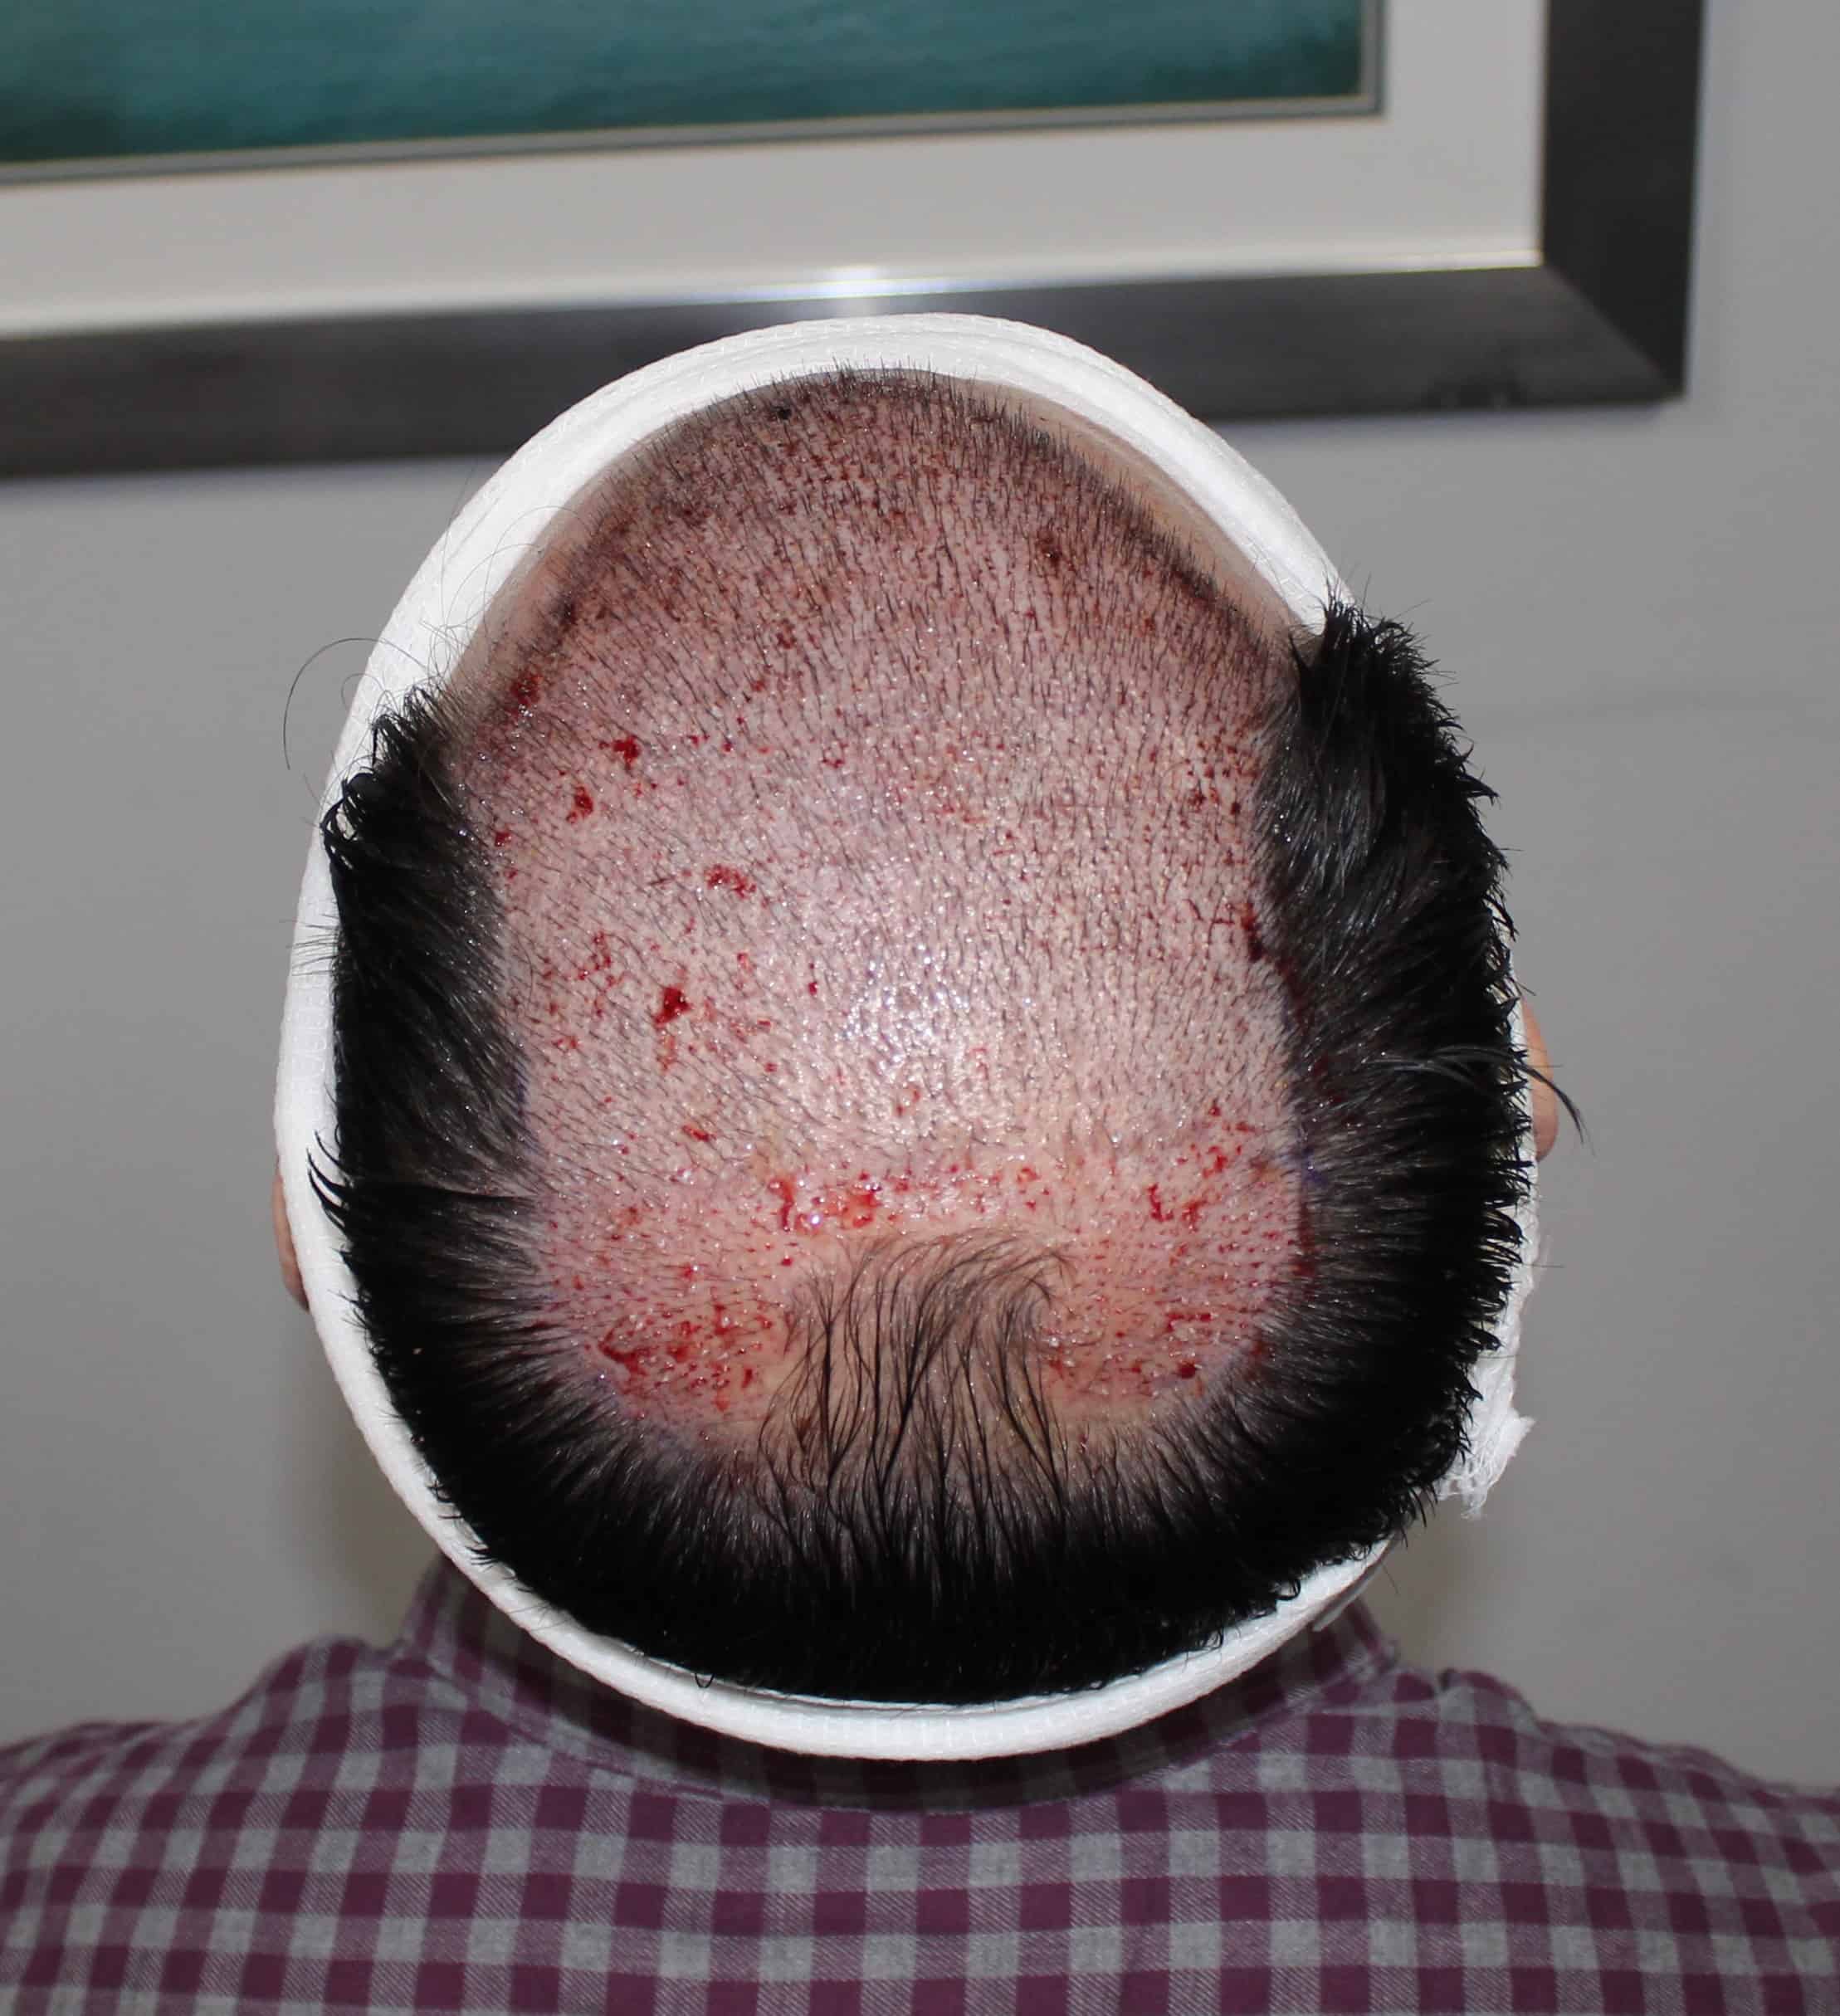 Why don't we do 5,000 Grafts? Wouldn't more Grafts Make a Better Hair  Transplant Result?